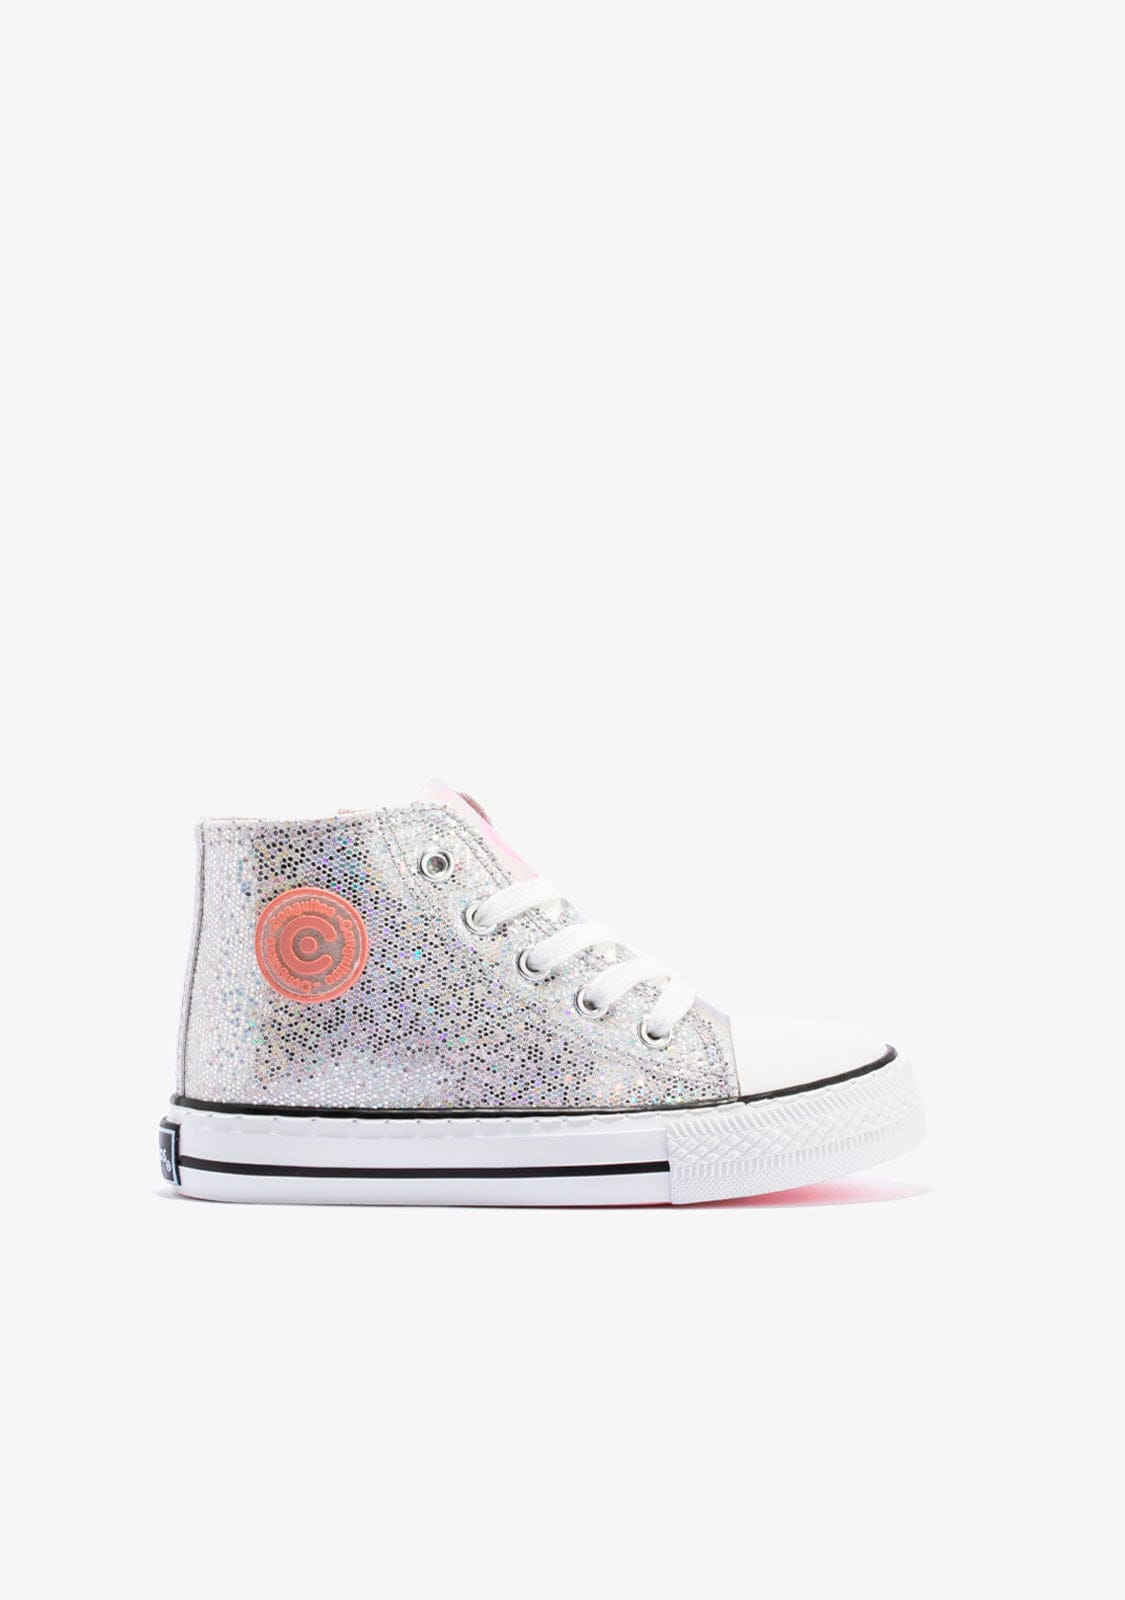 CONGUITOS Shoes Girl's Silver Glitter Hi-Top Sneakers